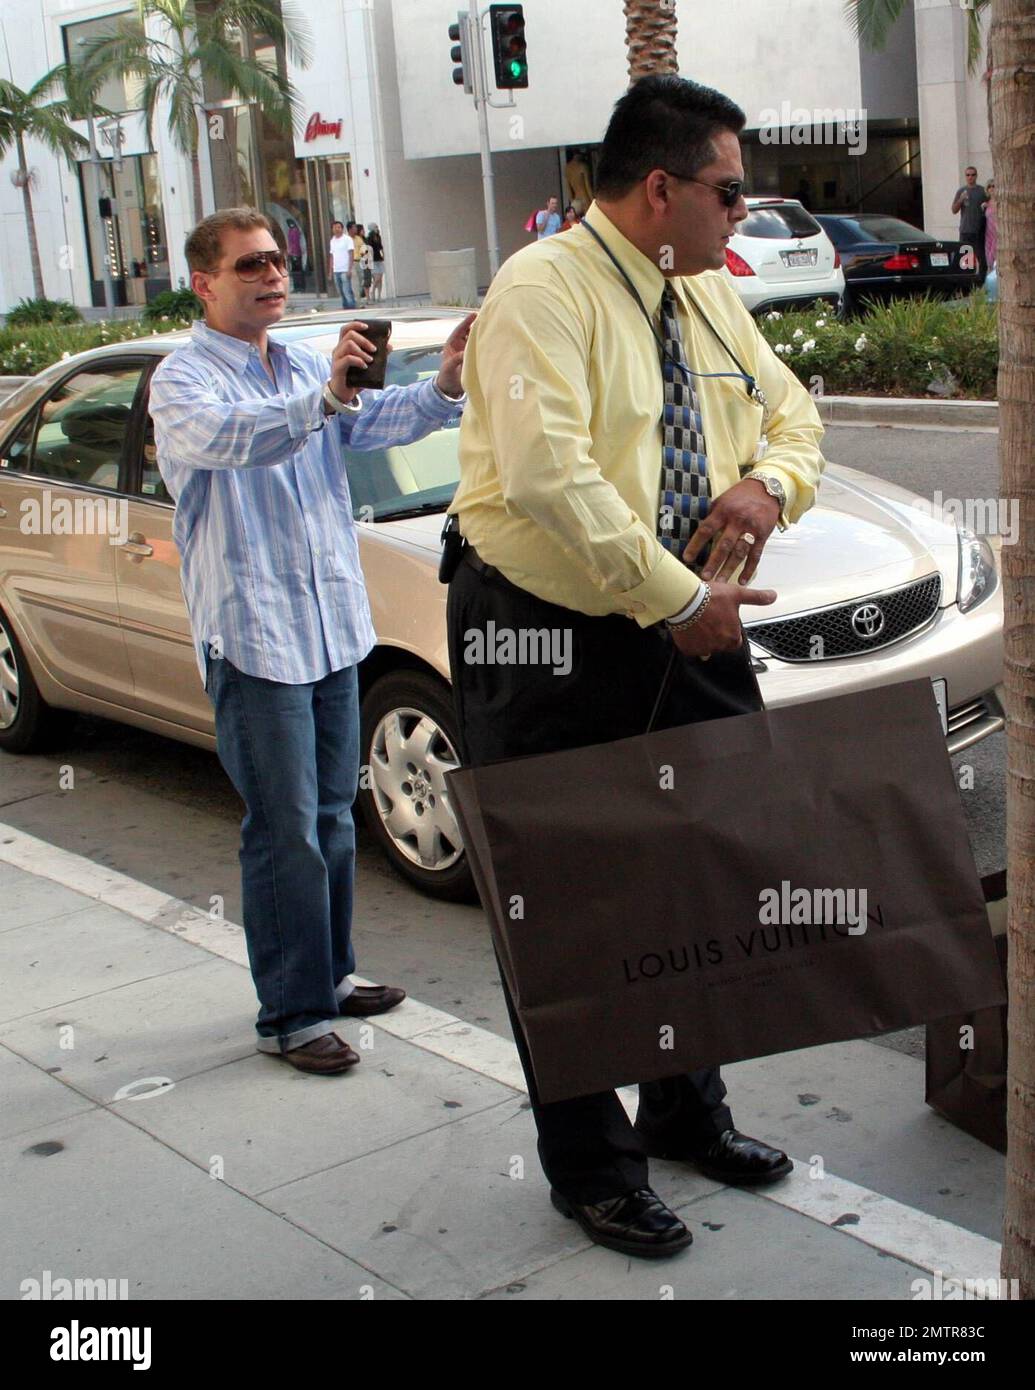 Exclusive!! Scott Storch gives directions on how to load his $450,000 Mercedes  Benz with bags full of designer Louis Vuitton clothes. 9/18/05 Stock Photo  - Alamy